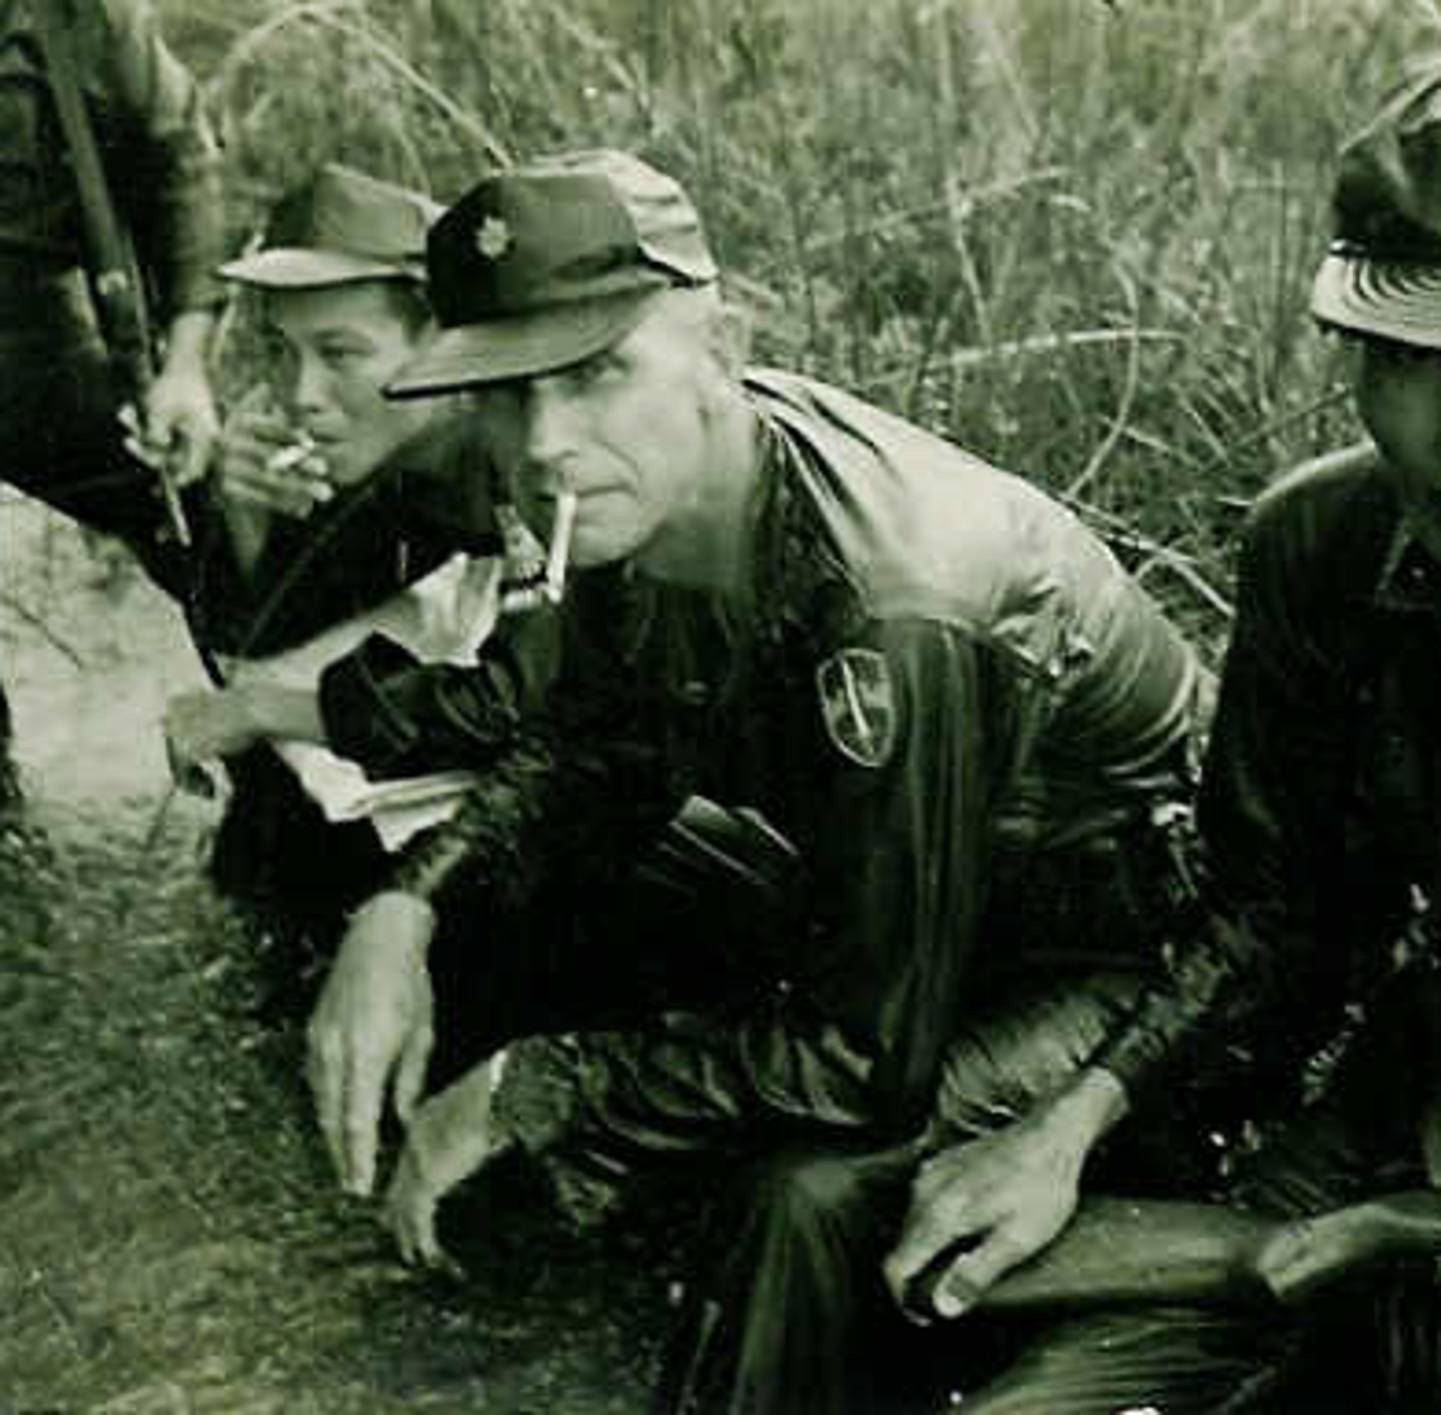 An older U.S. soldier crouched down with Asian soldiers, smoking a cigarette.